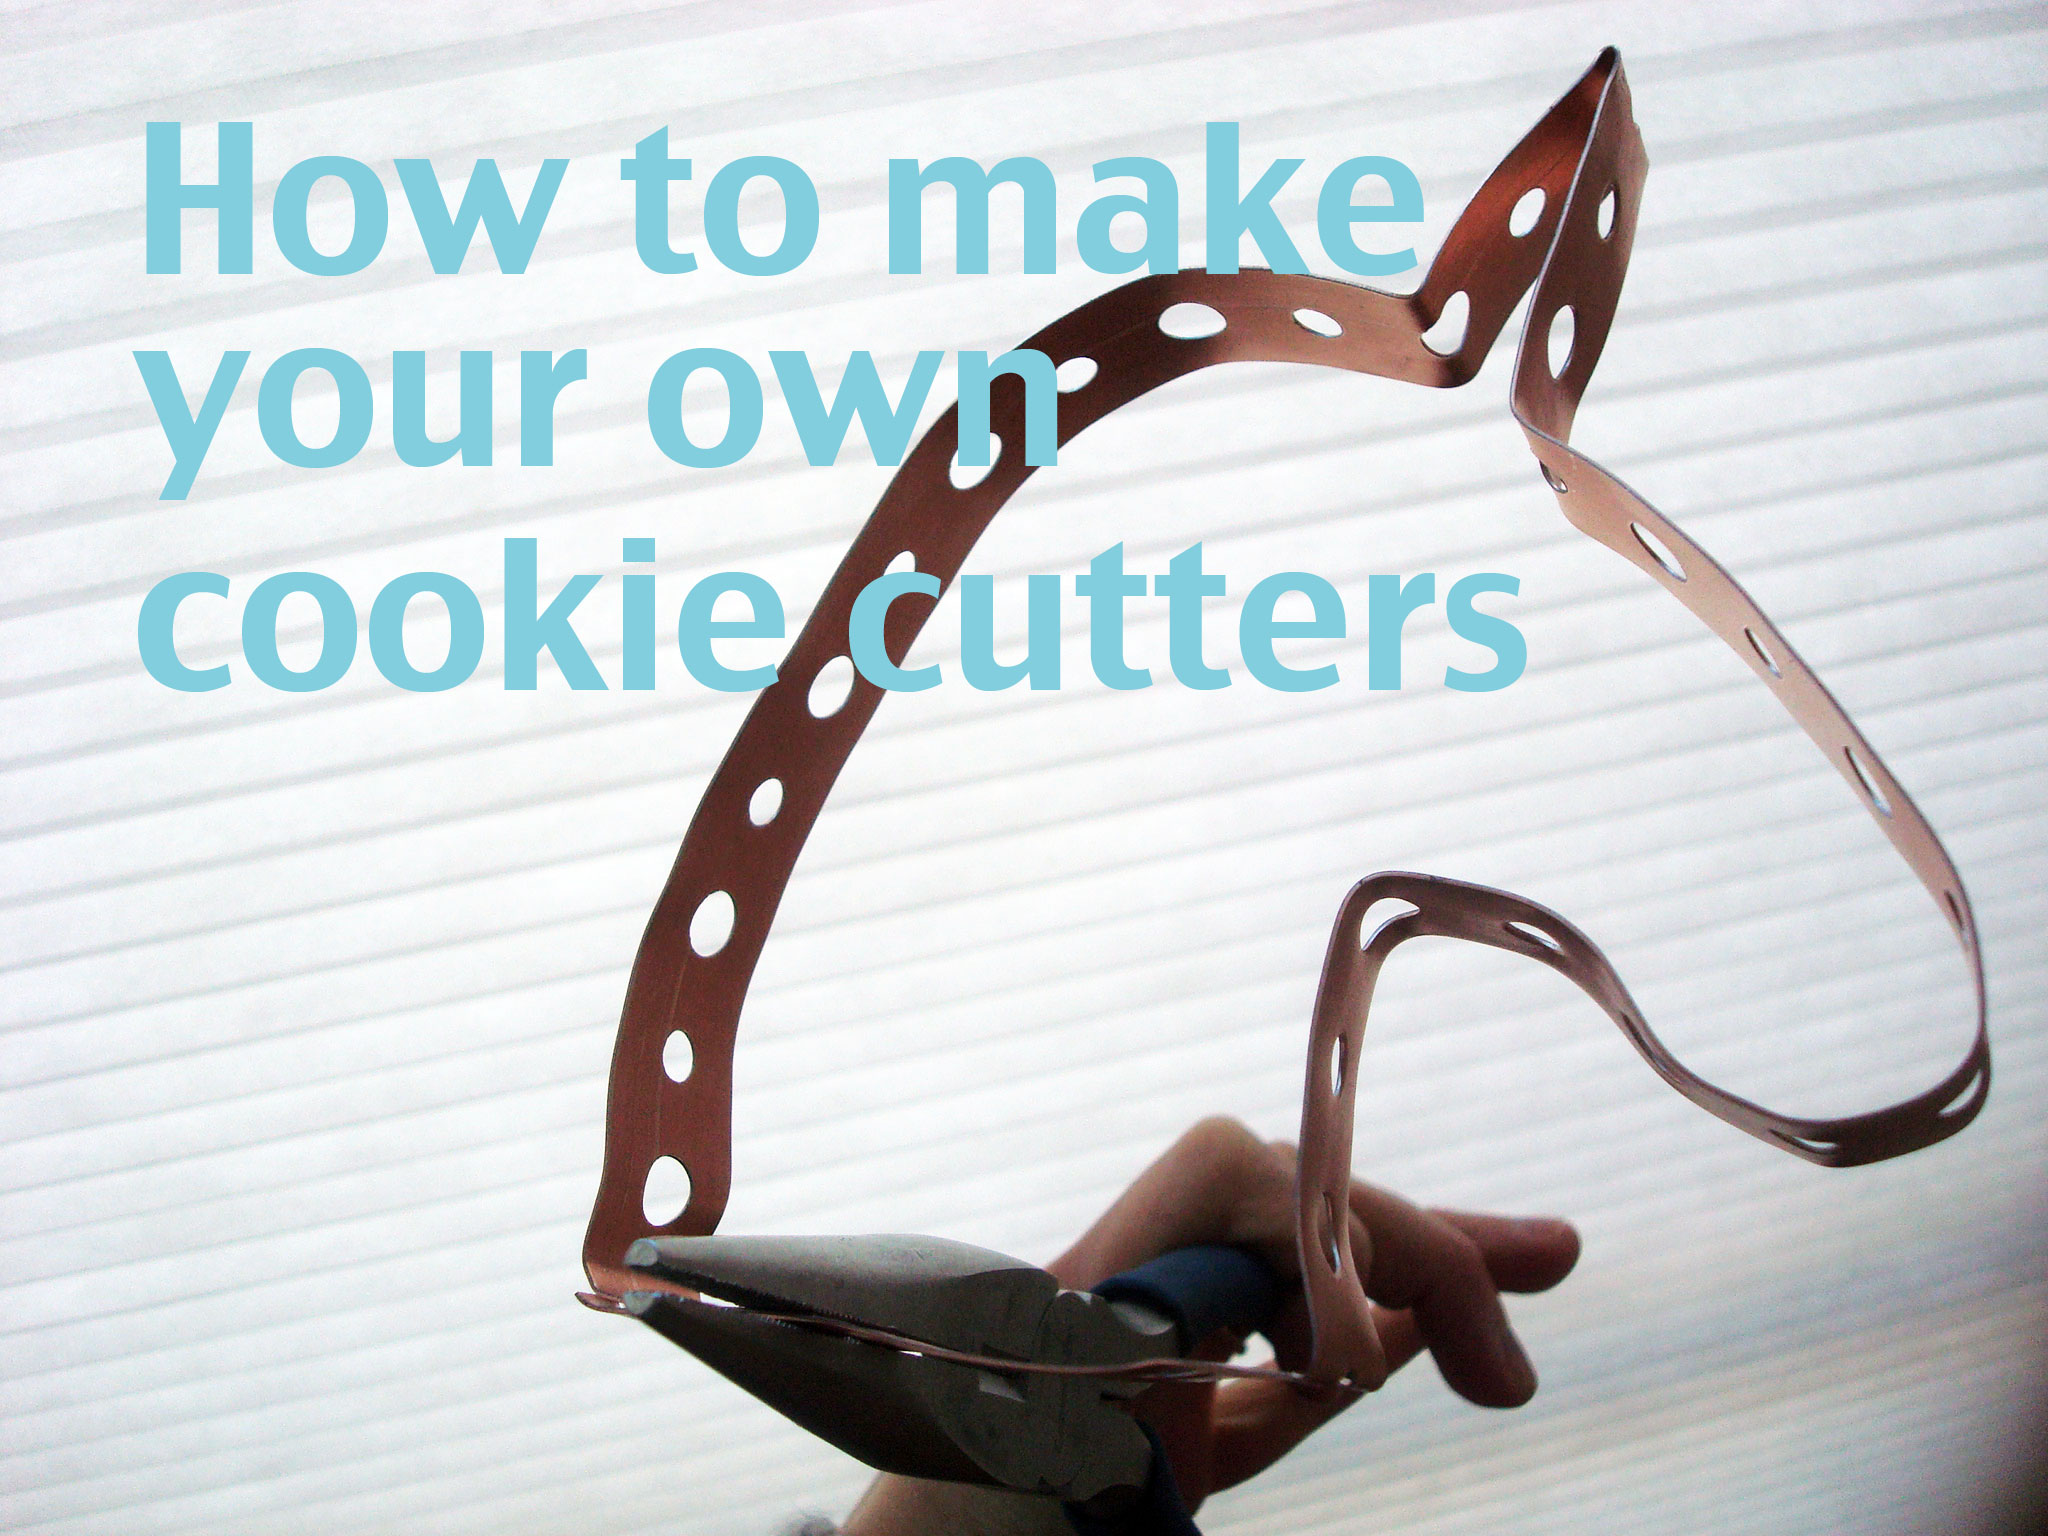 Title Image: How to Make Cookie Cutters on Bluprint.com